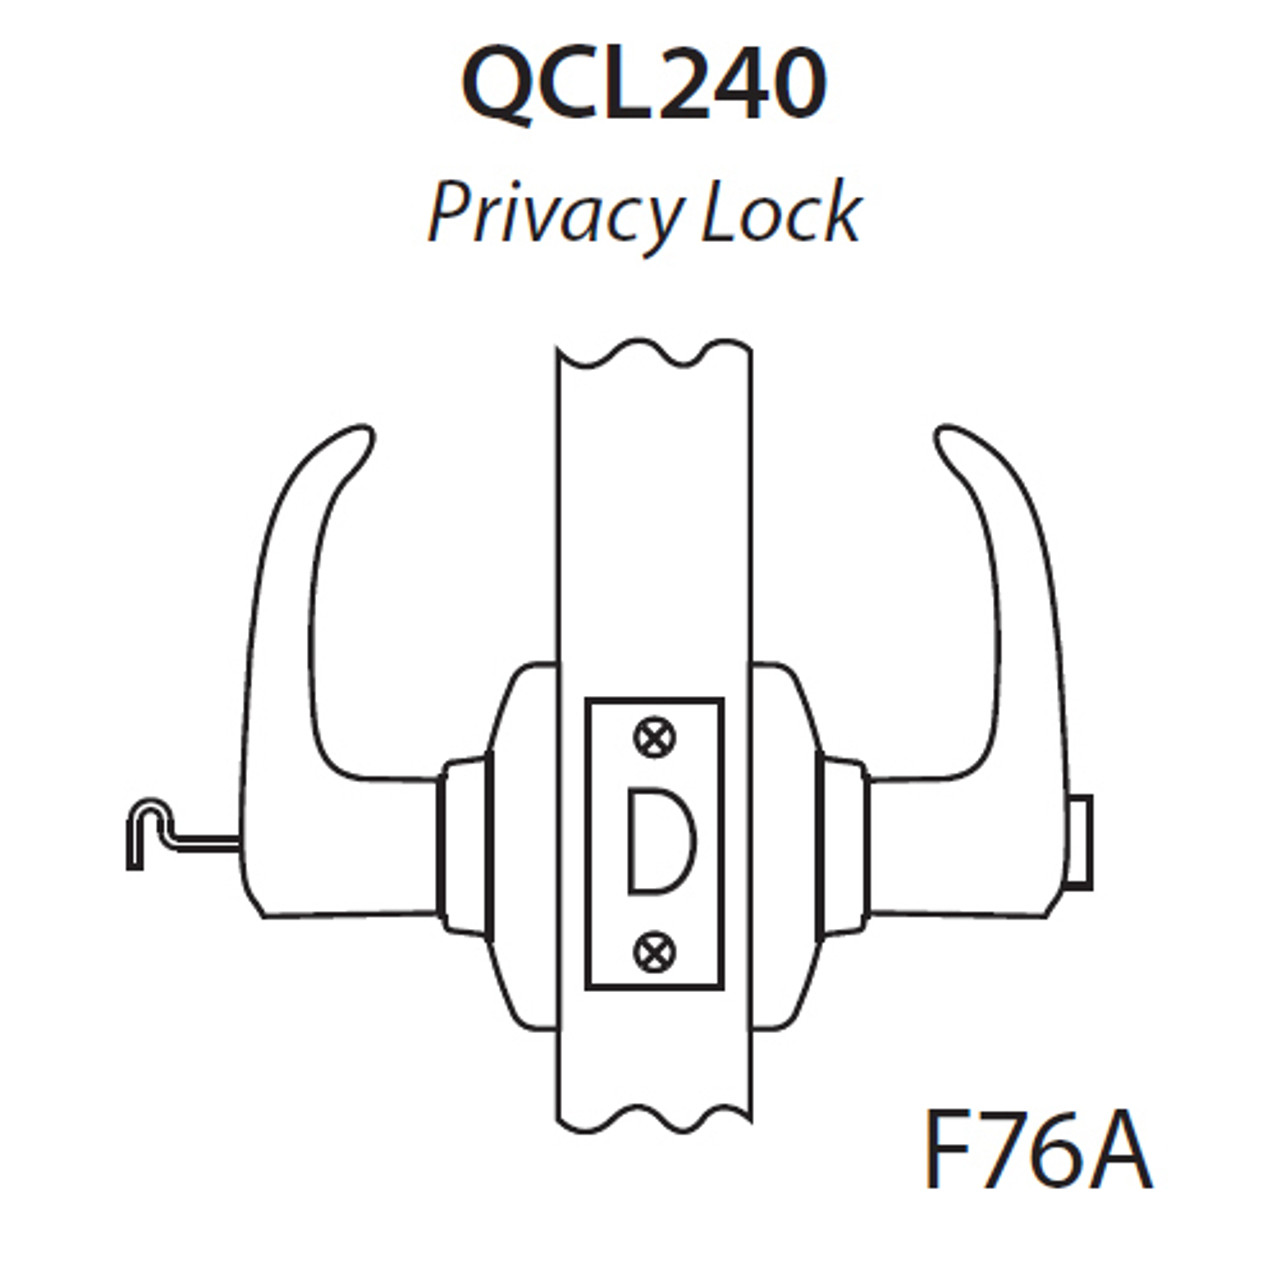 QCL240A626NS4NOS Stanley QCL200 Series Cylindrical Privacy Lock with Slate Lever in Satin Chrome Finish